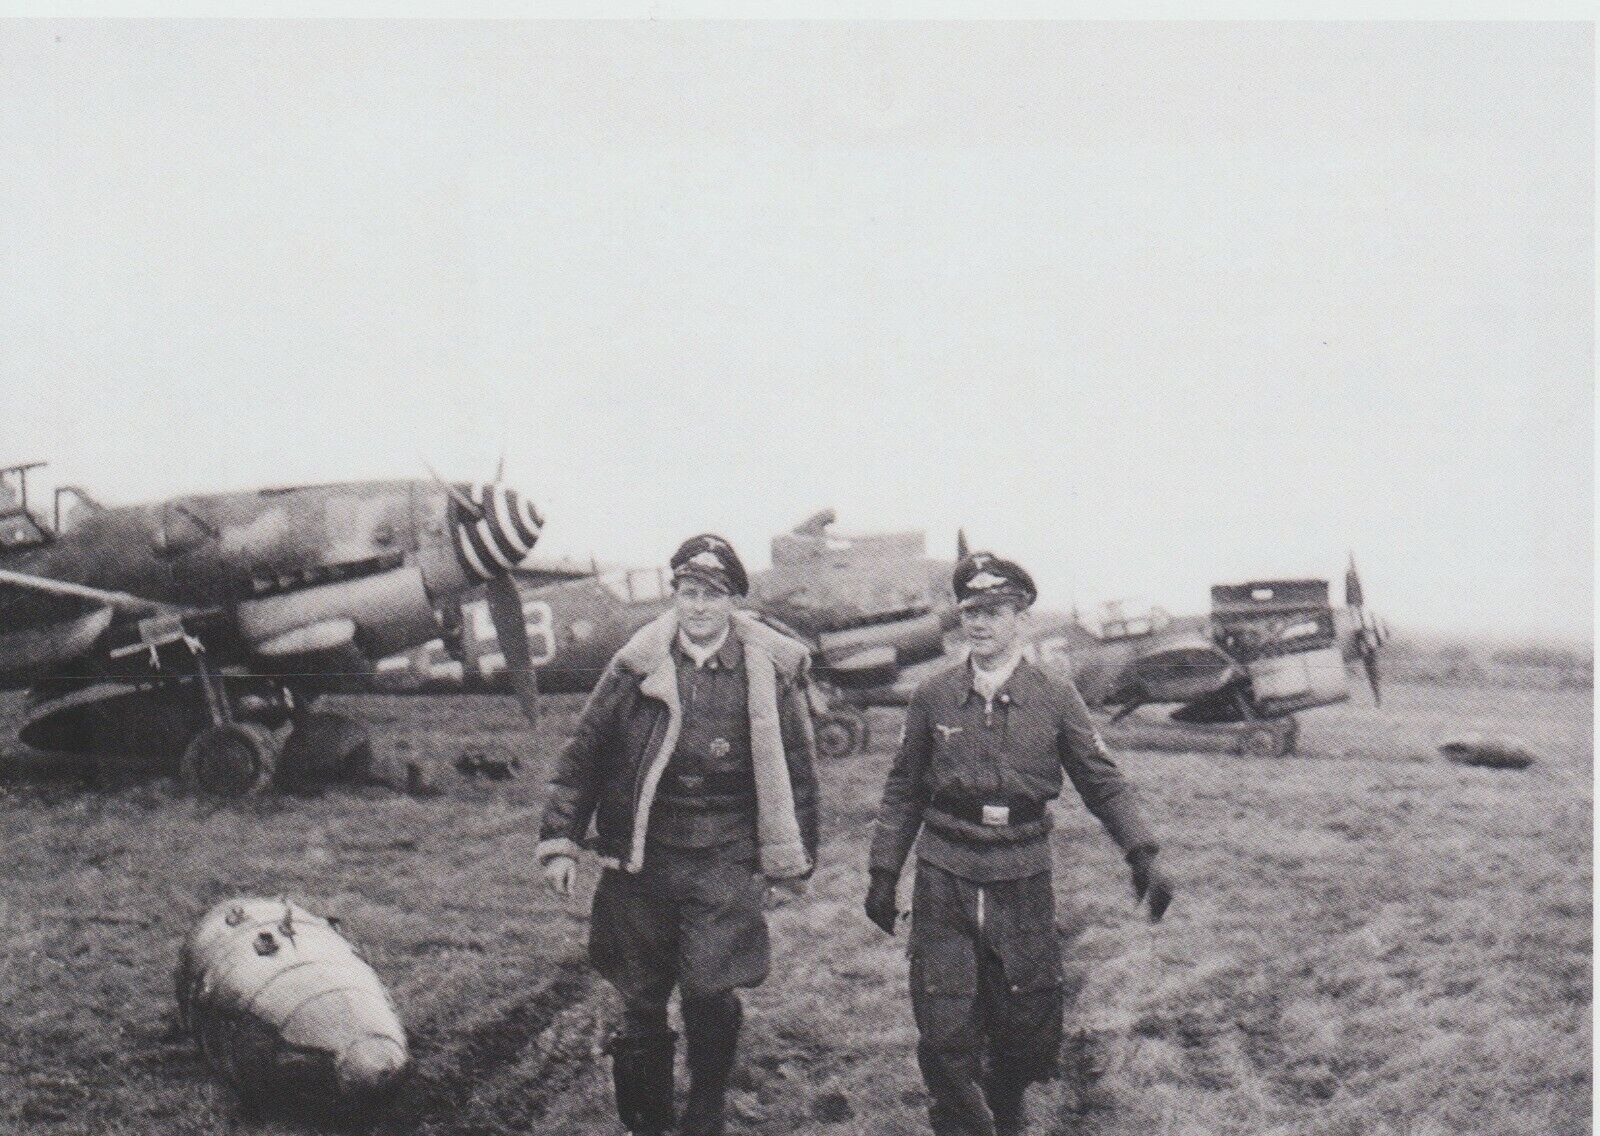 OFw Muller and Fw Blume of Luftwaffe 4/JG27 with their BF109G-6s WW2 5x7